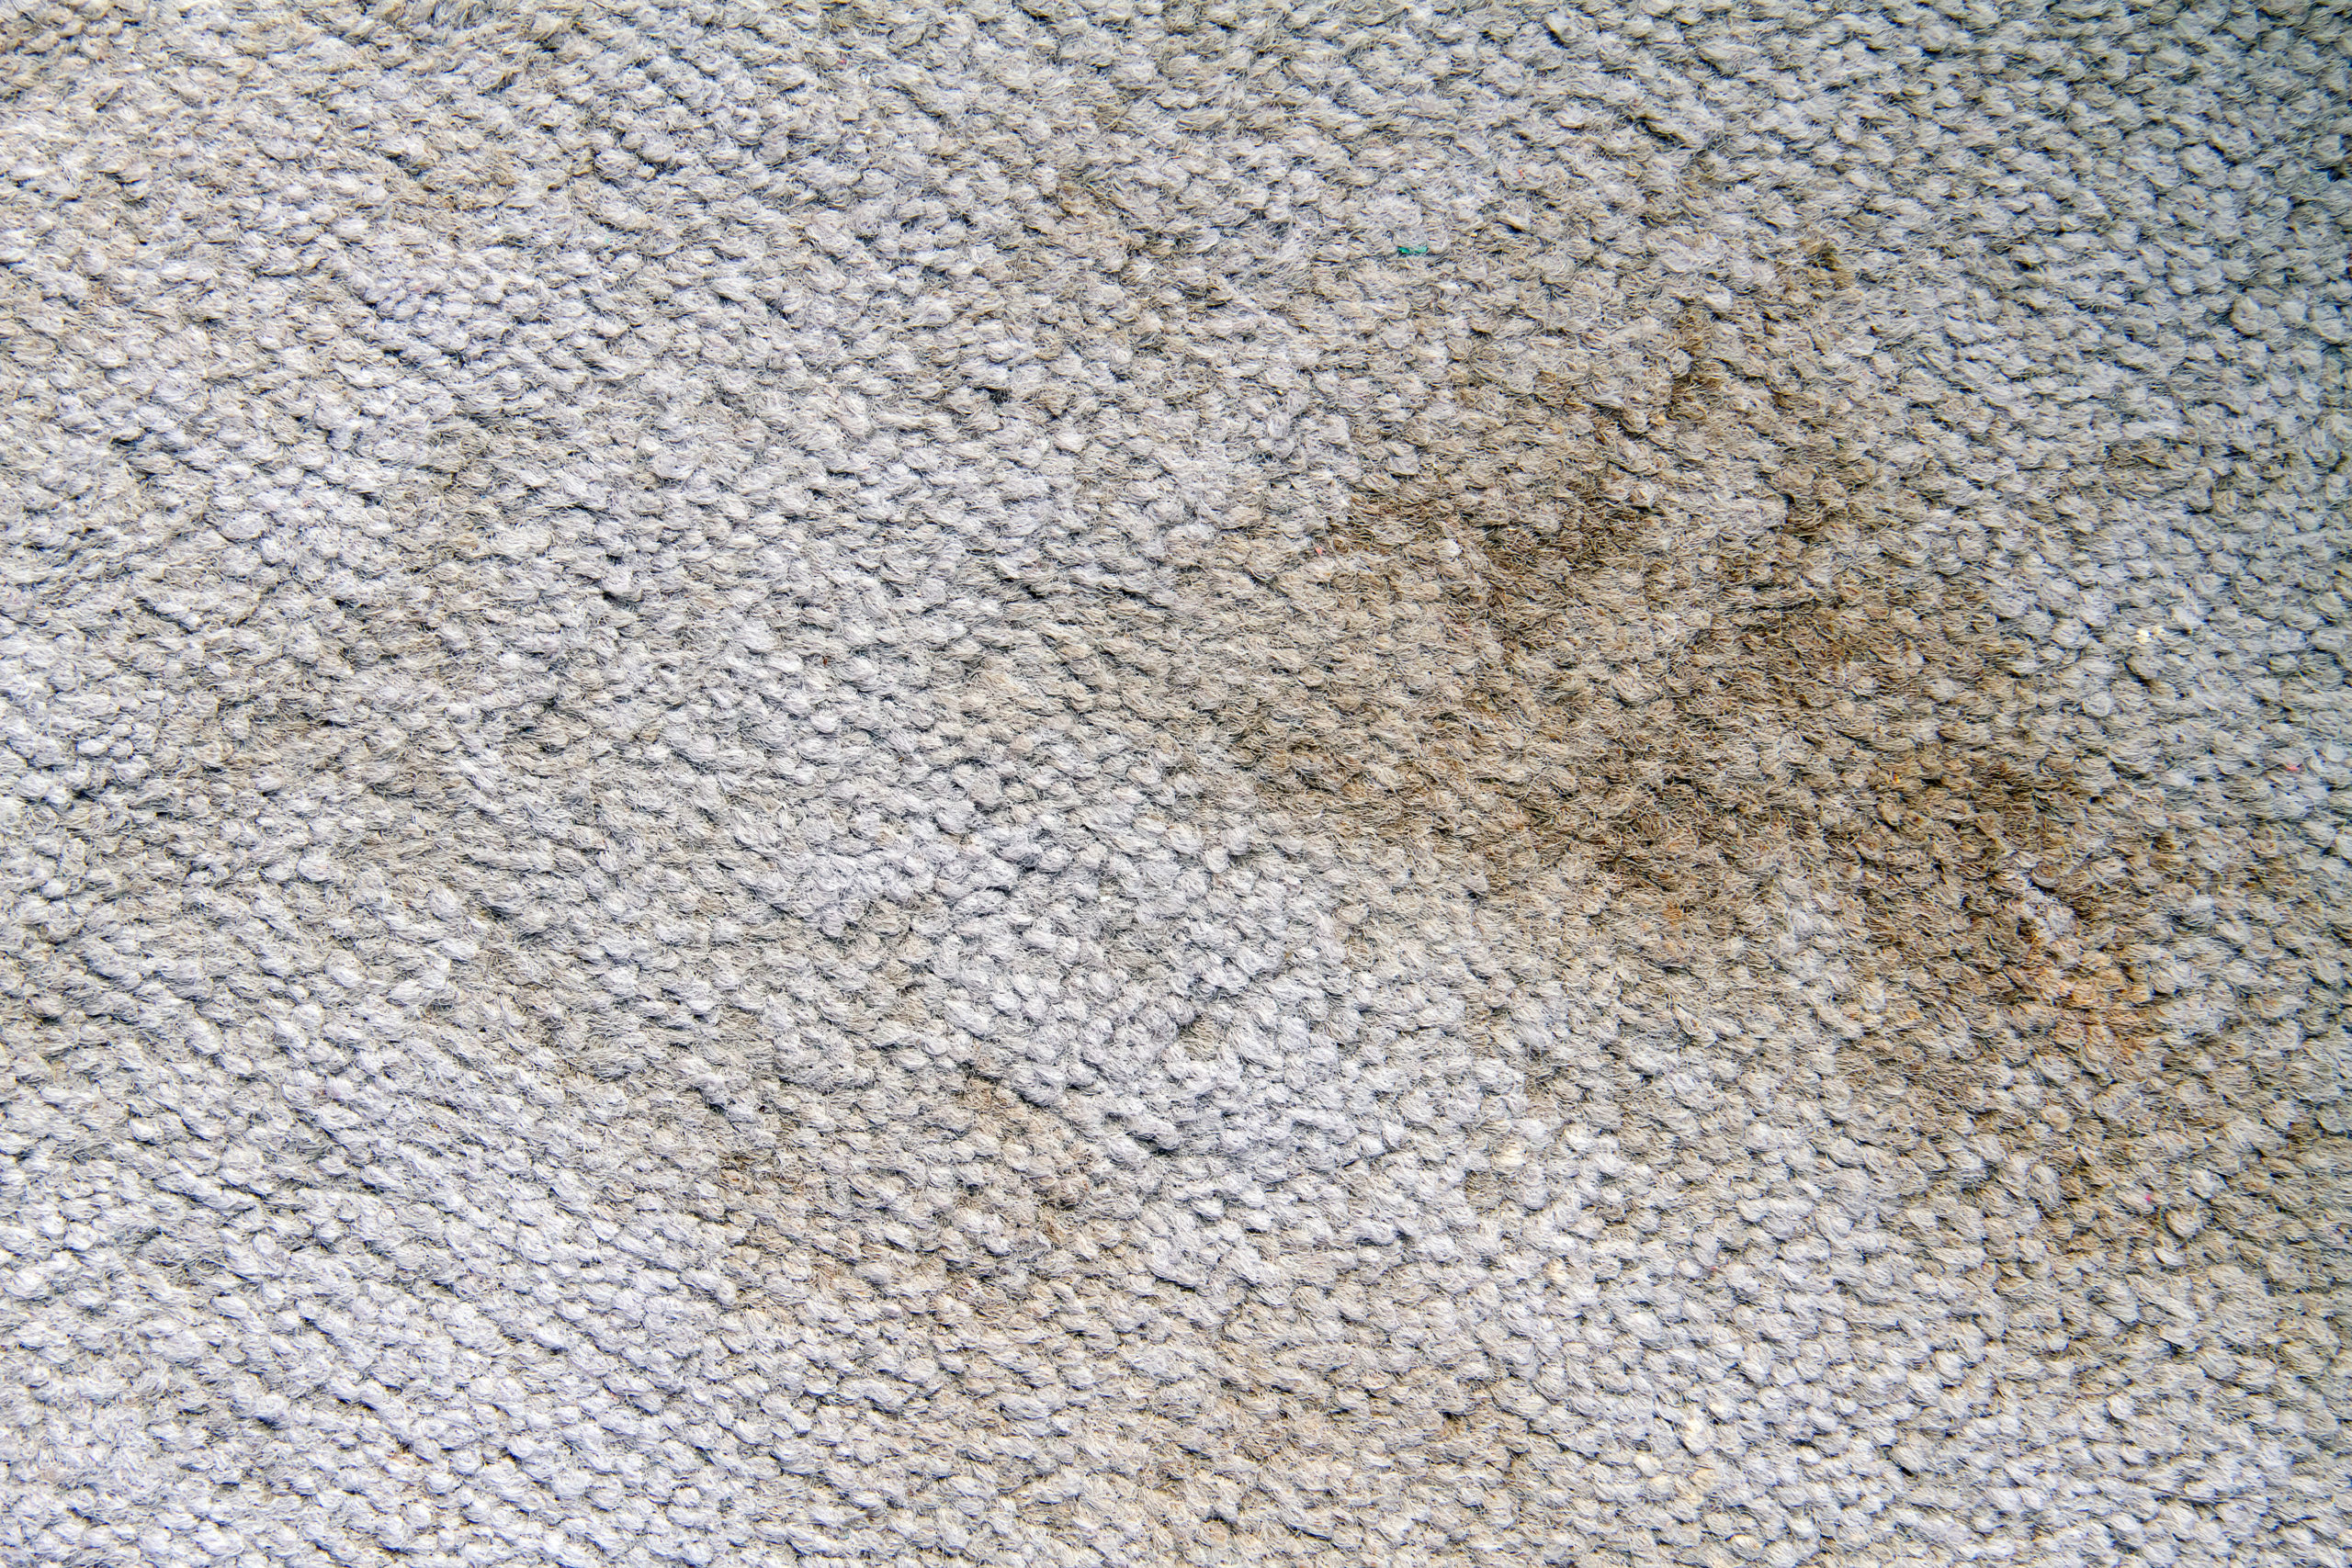 old and worn carpet